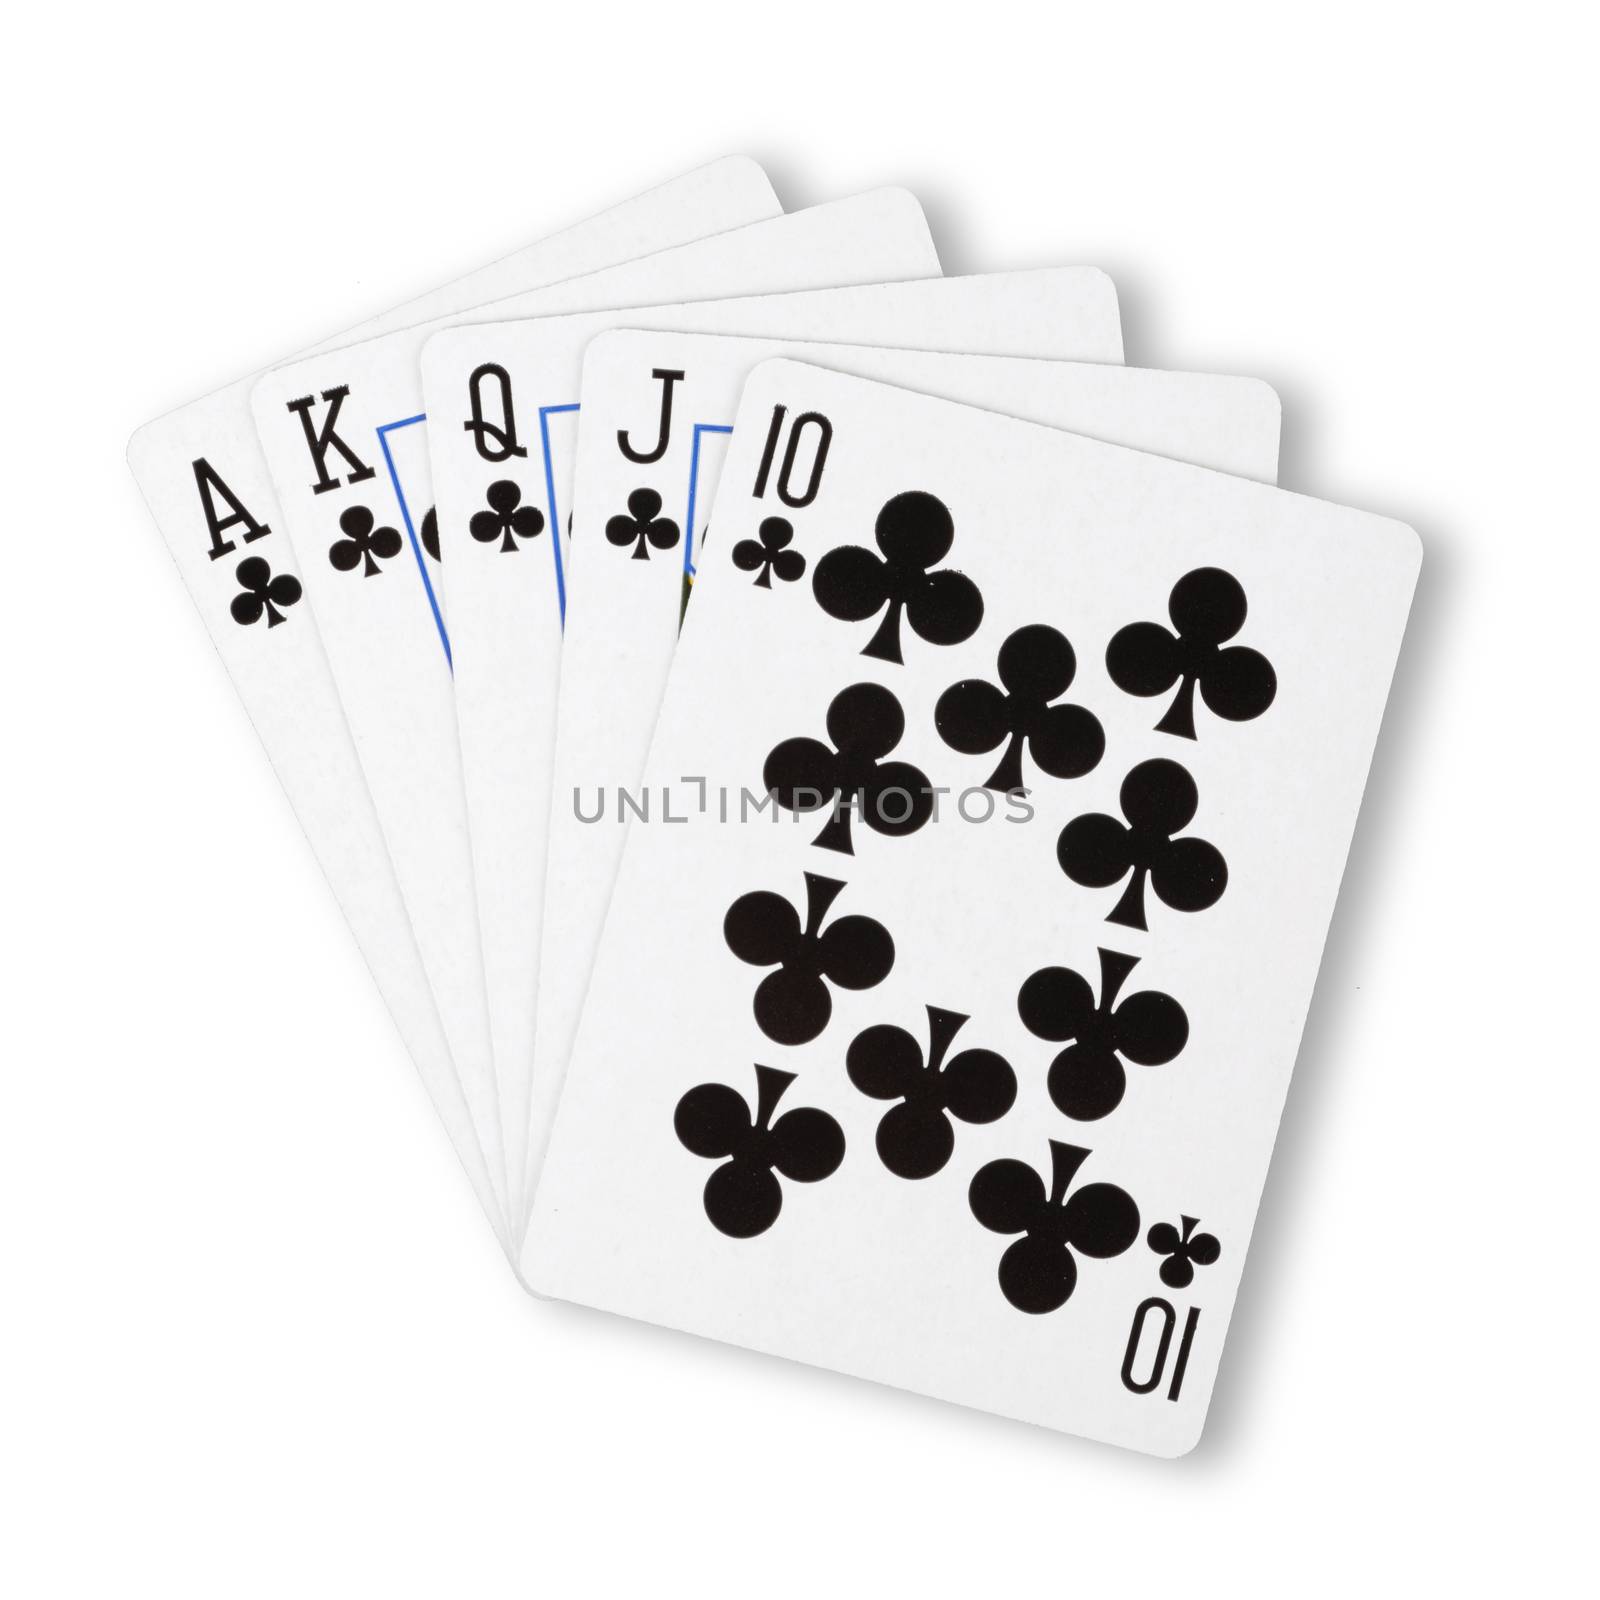 A Clubs royal flush flat on white winning hand business concept